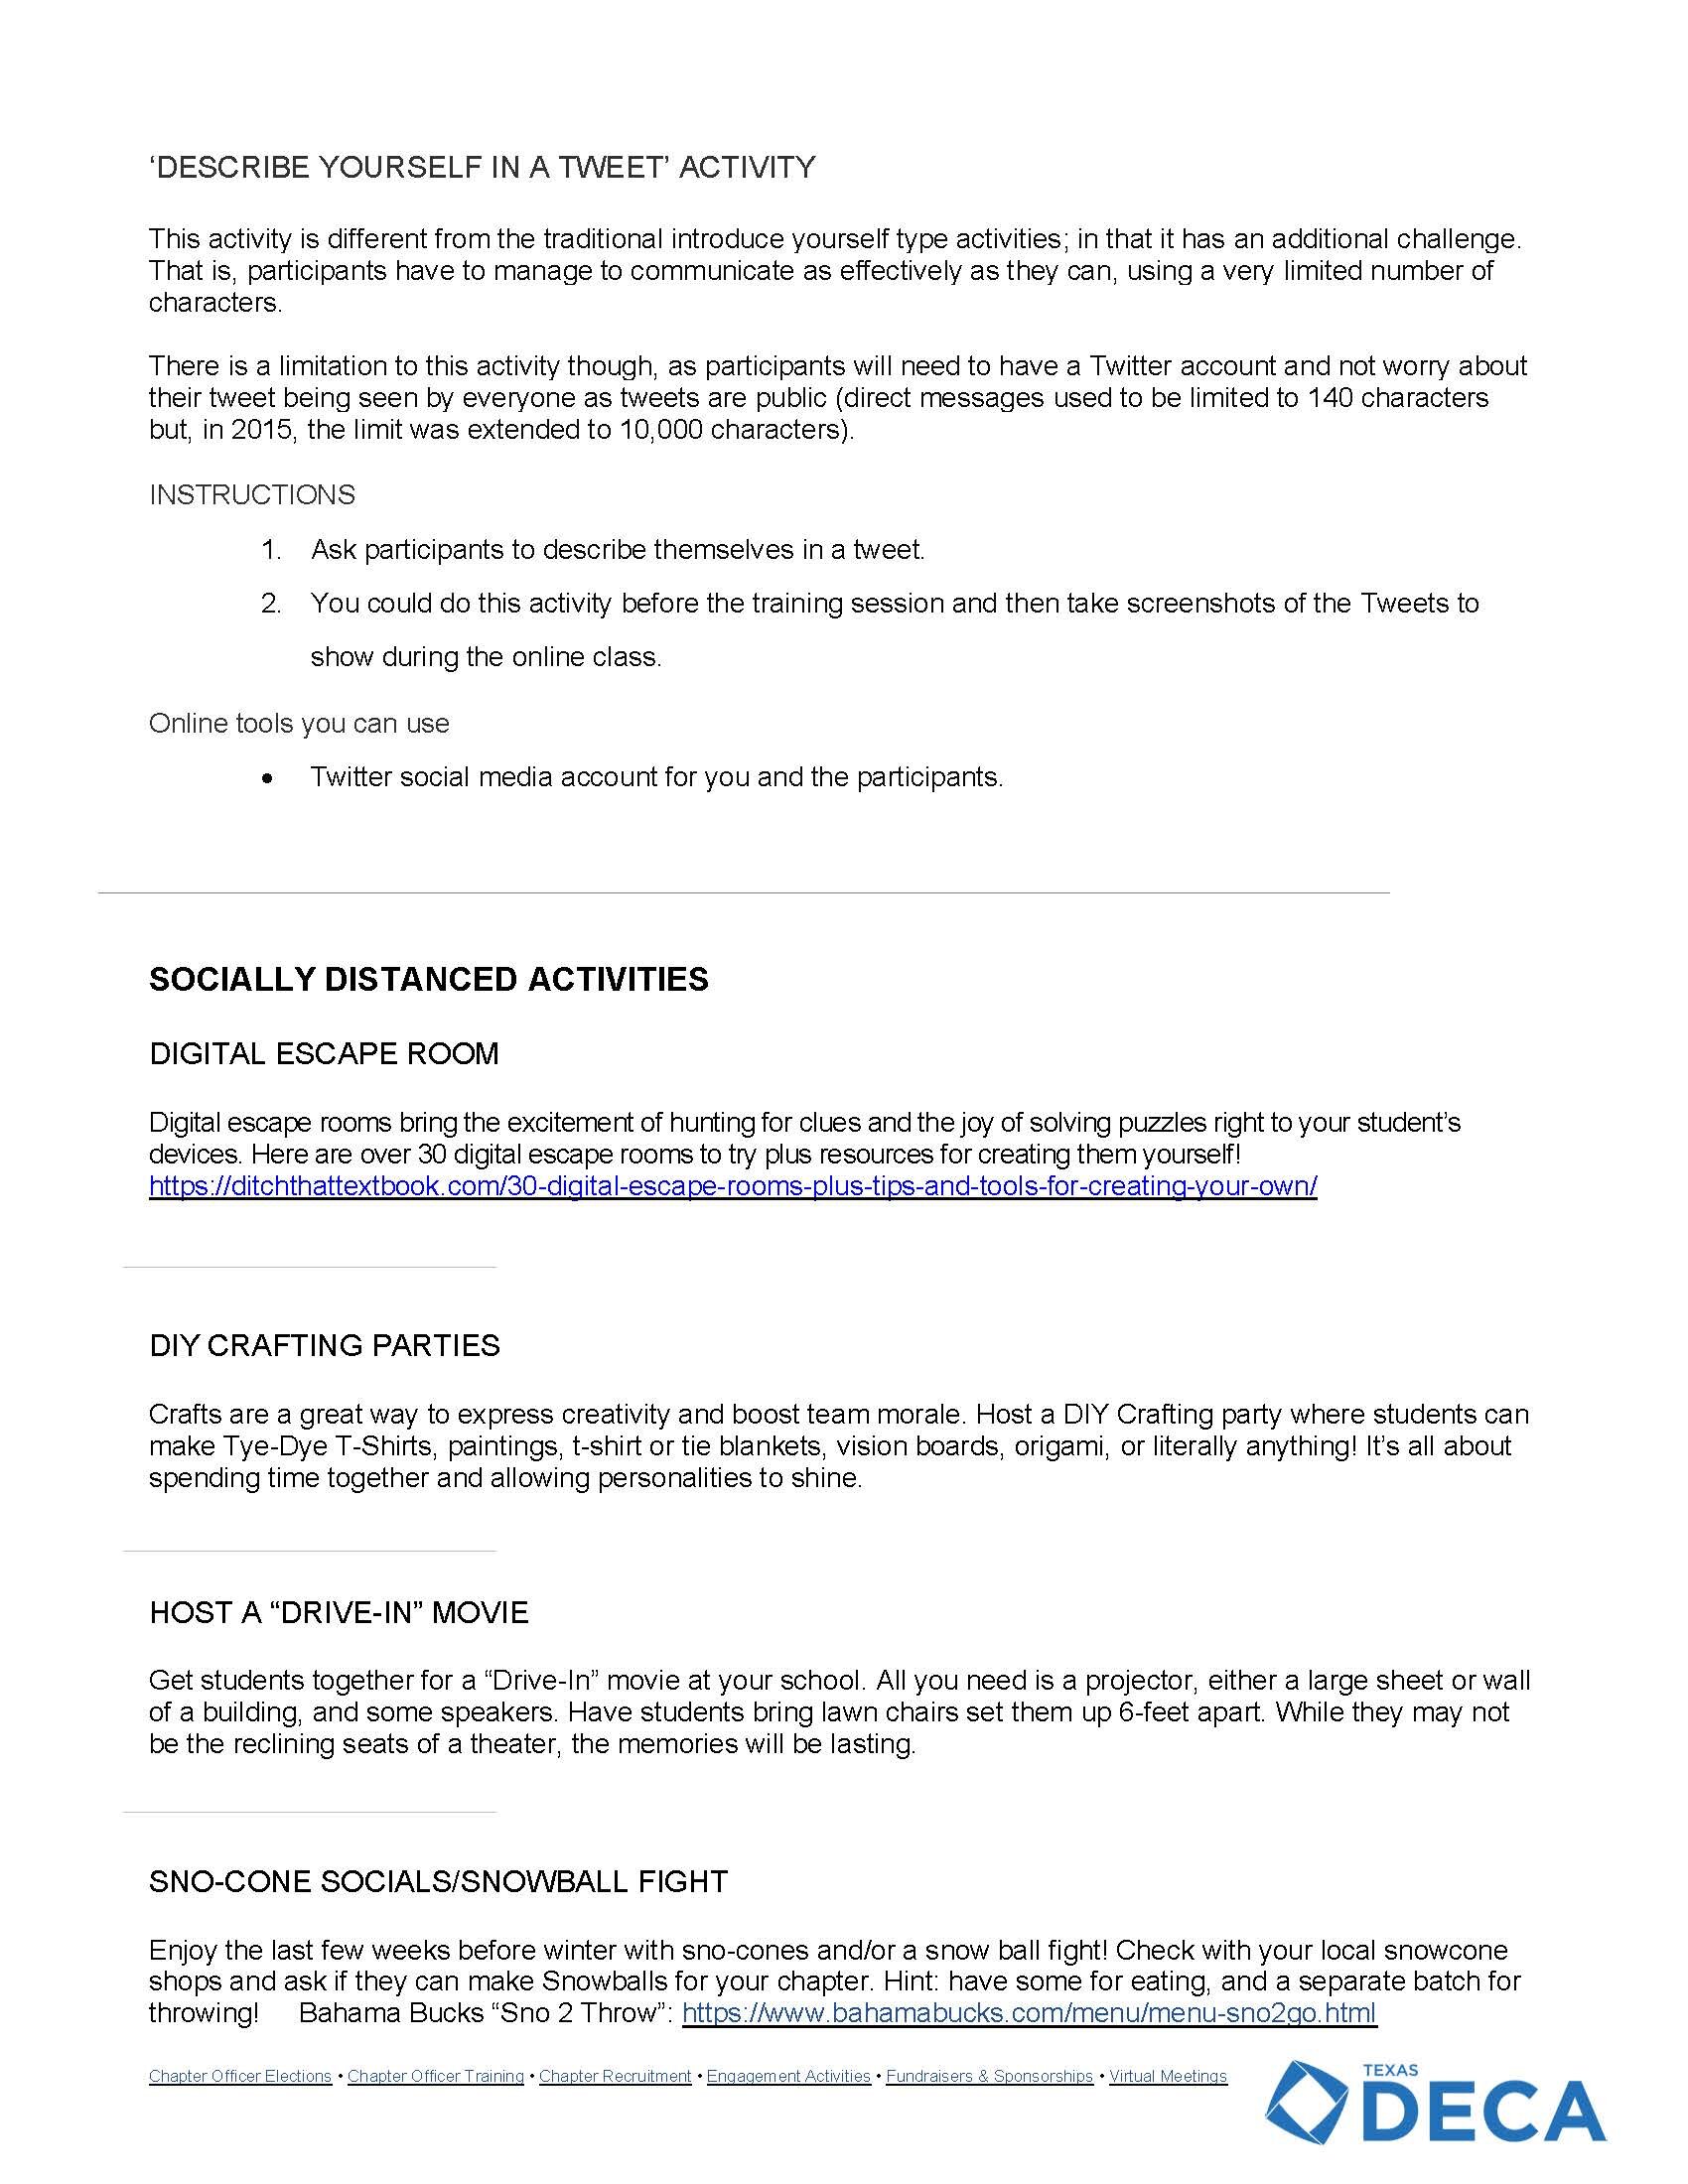 Chapter Toolkit - Texas DECA_Page_12.jpg